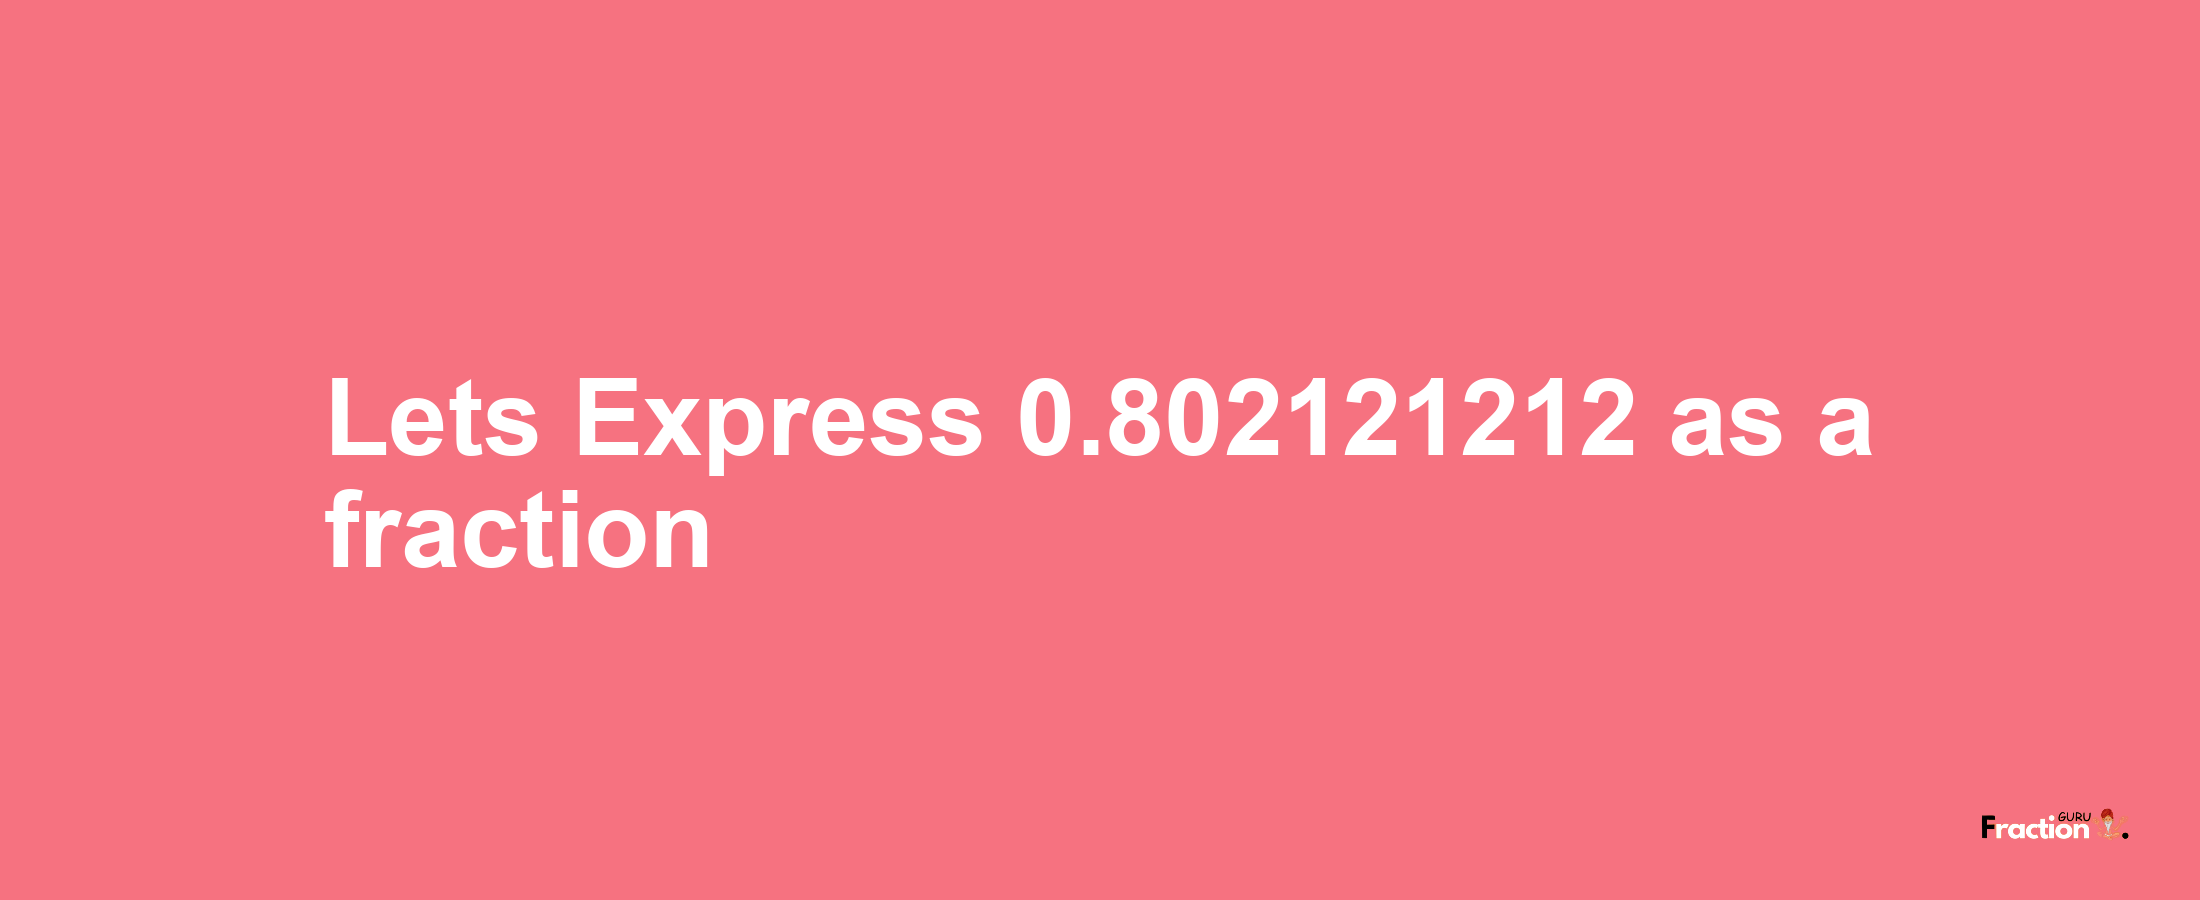 Lets Express 0.802121212 as afraction